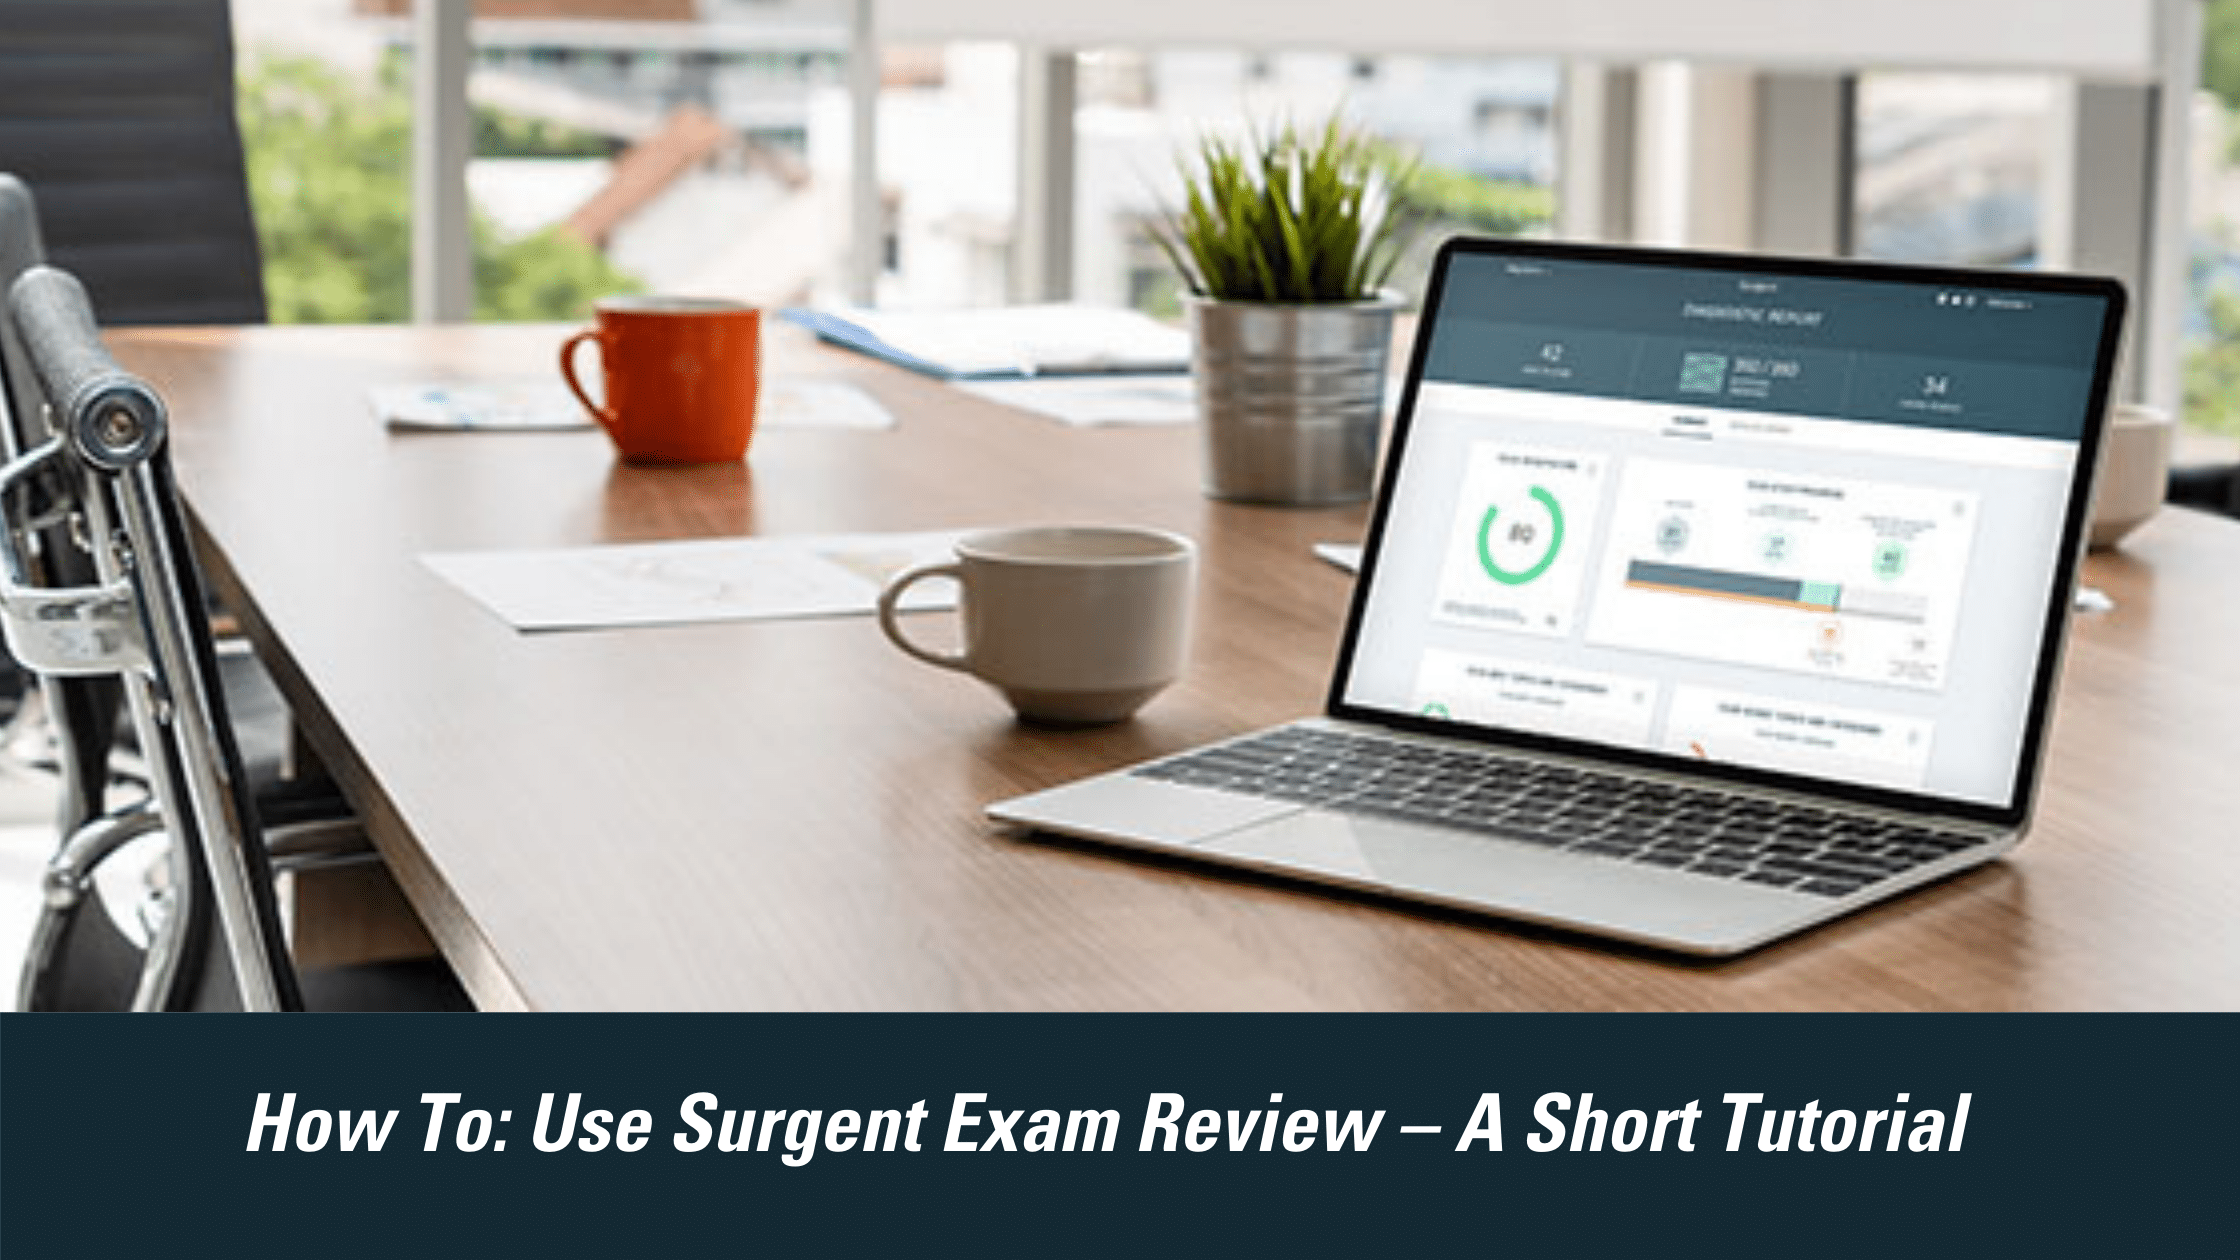 How To: Use Surgent Exam Review – A Short Tutorial